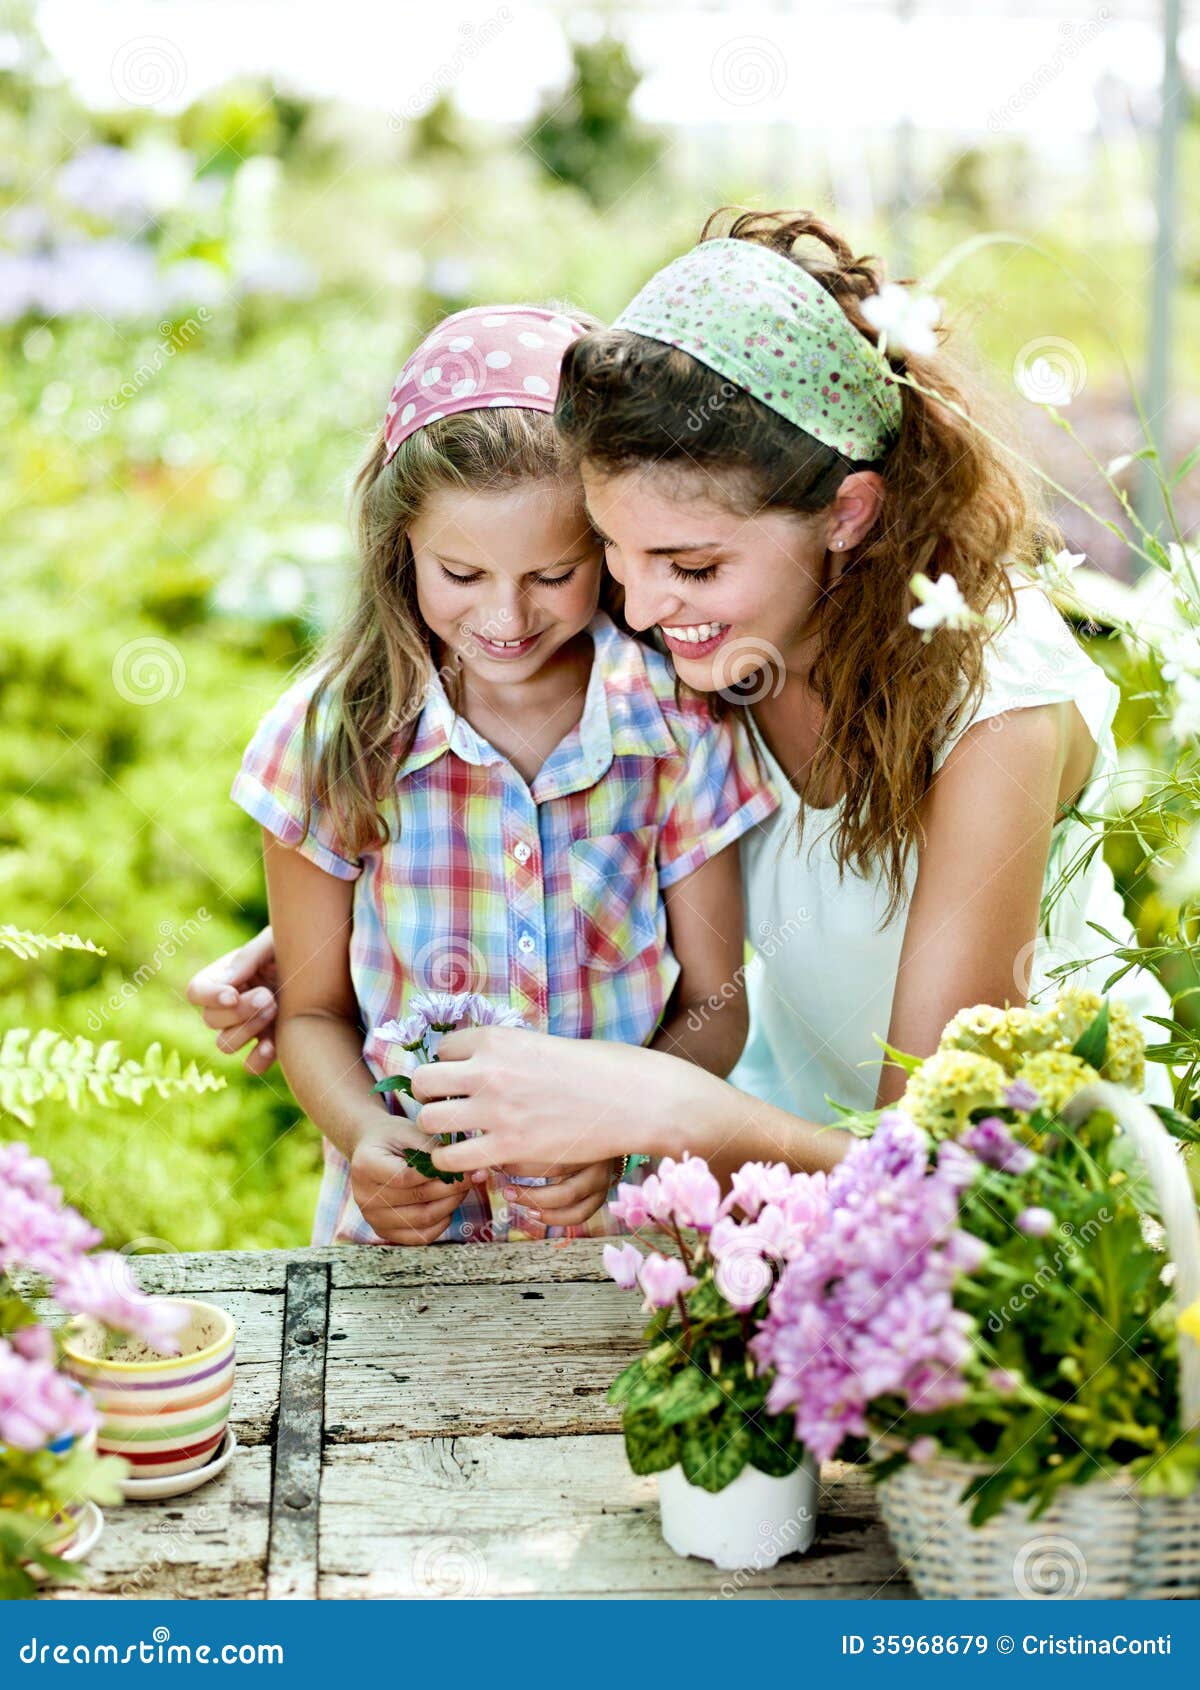 Mom And Daughter Have Fun In The Work Of Gardening Stock Image - Image